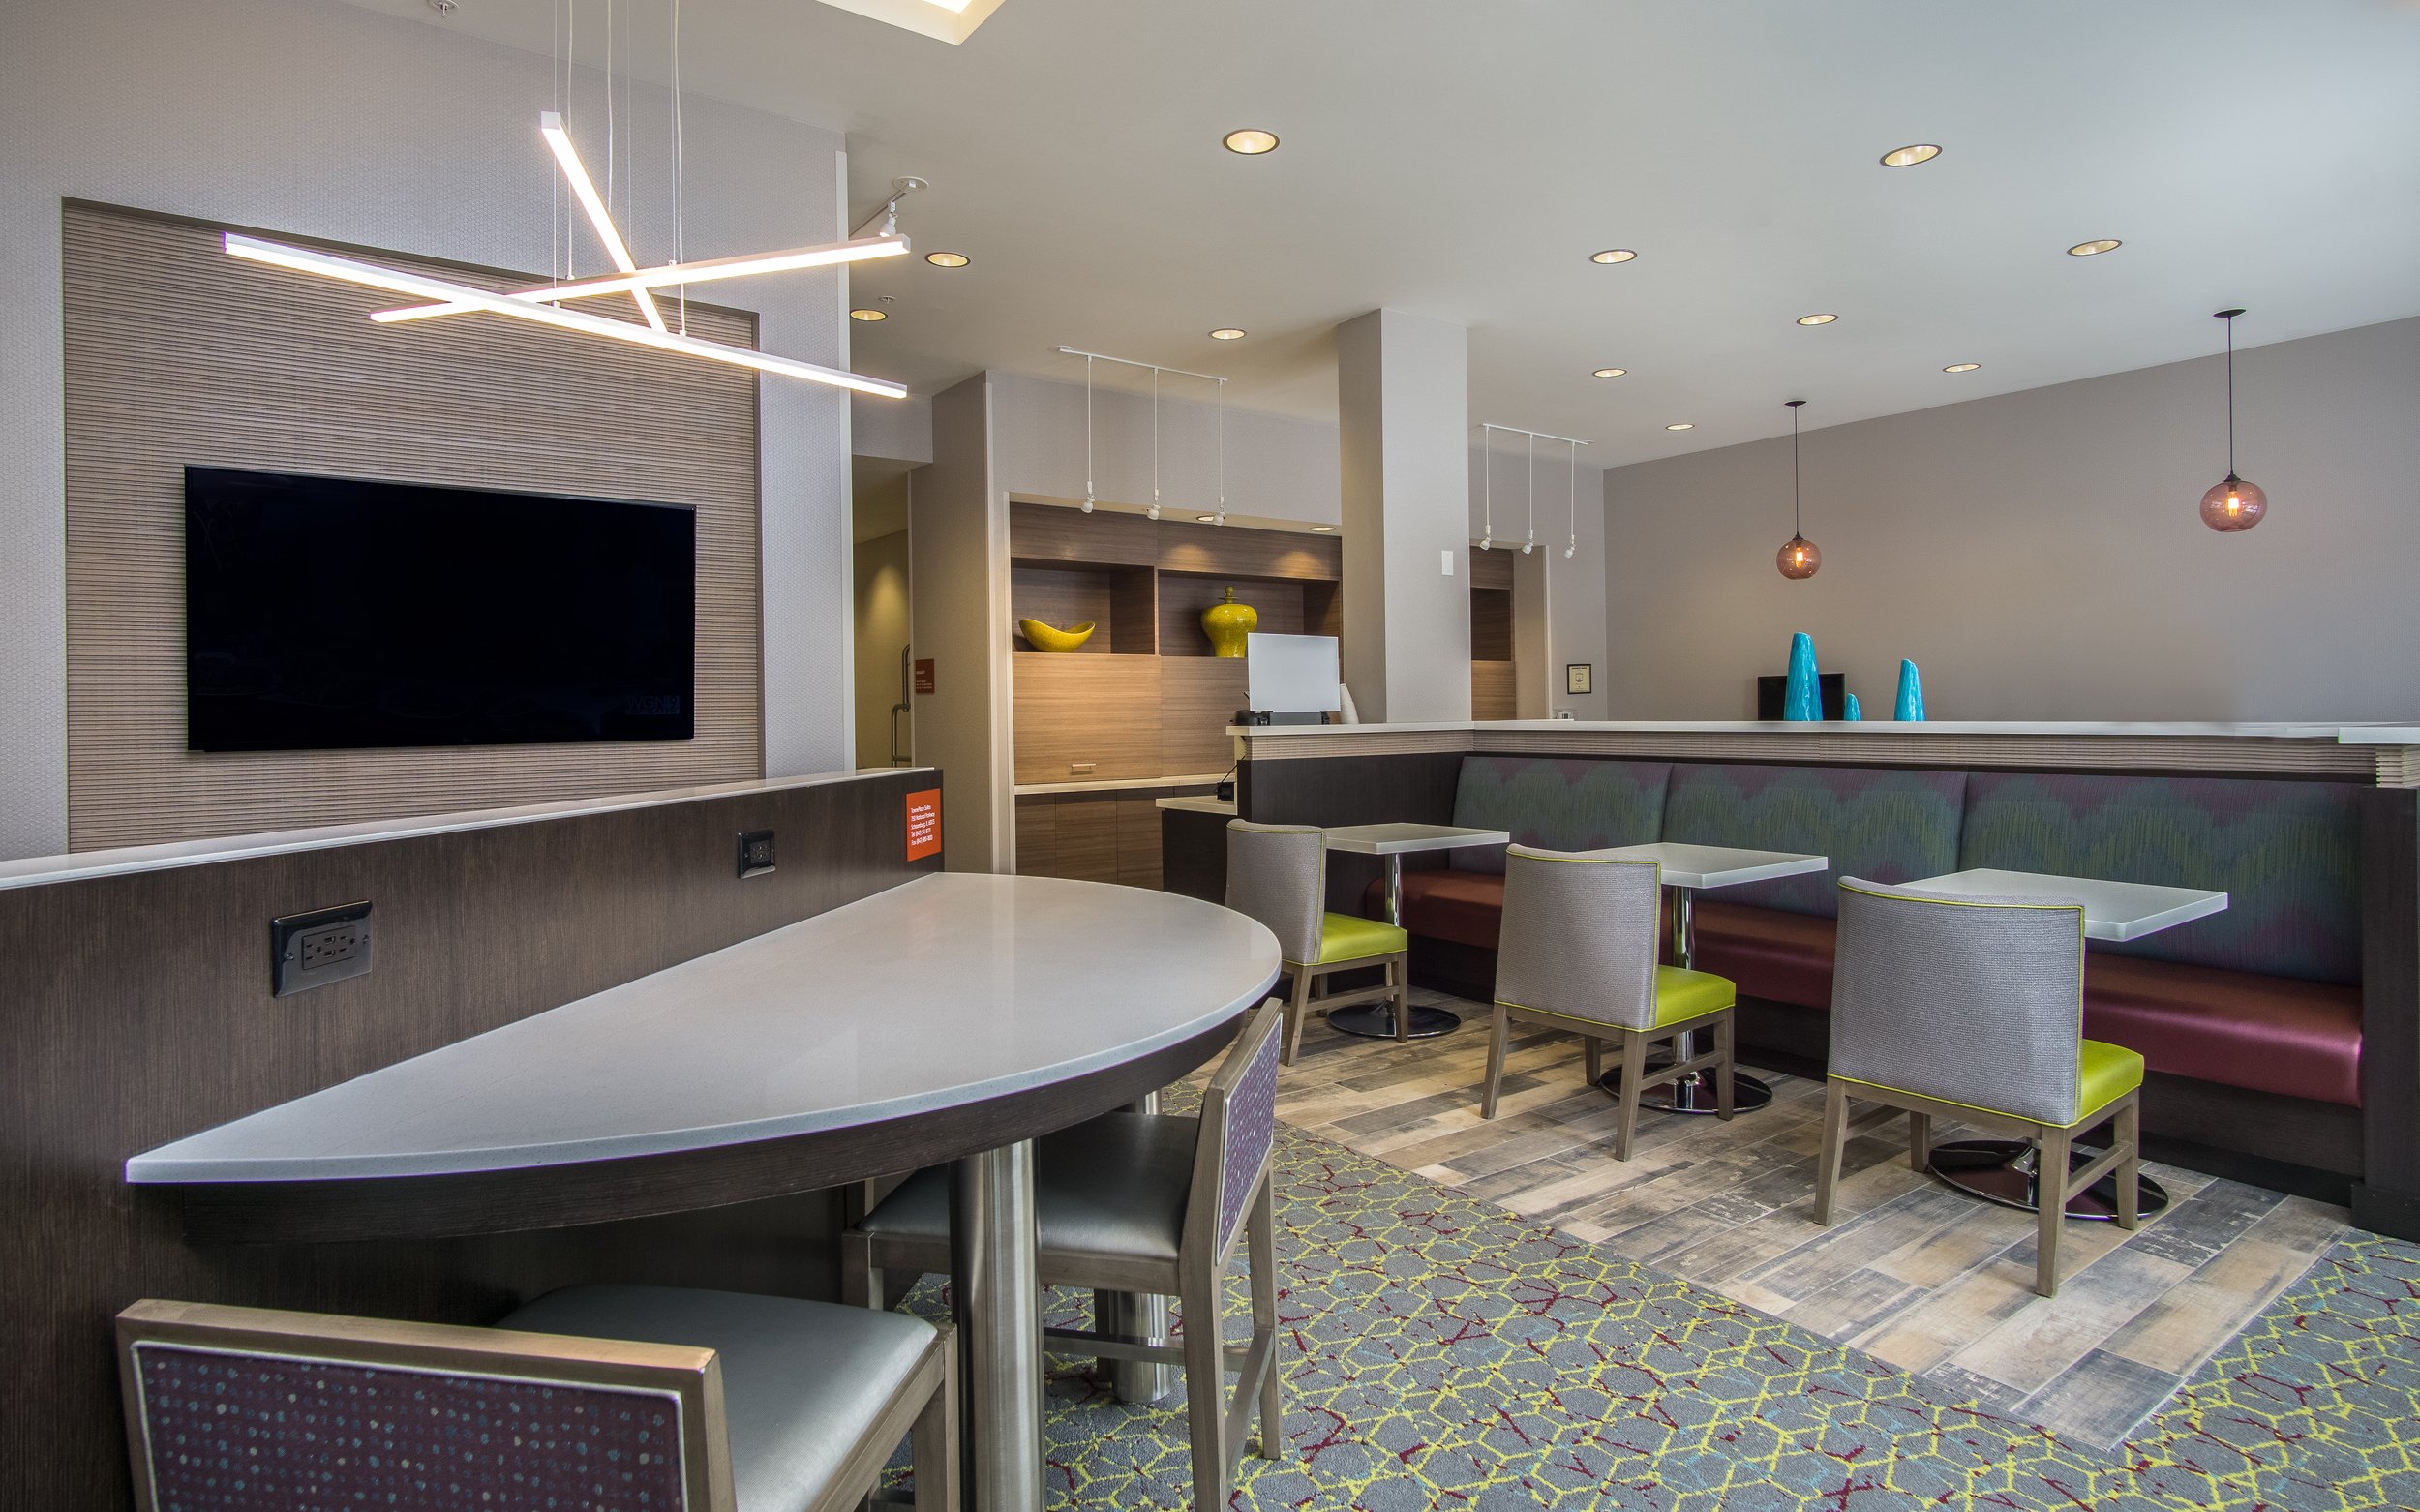 TownePlace Suites by Marriott lobby communal space